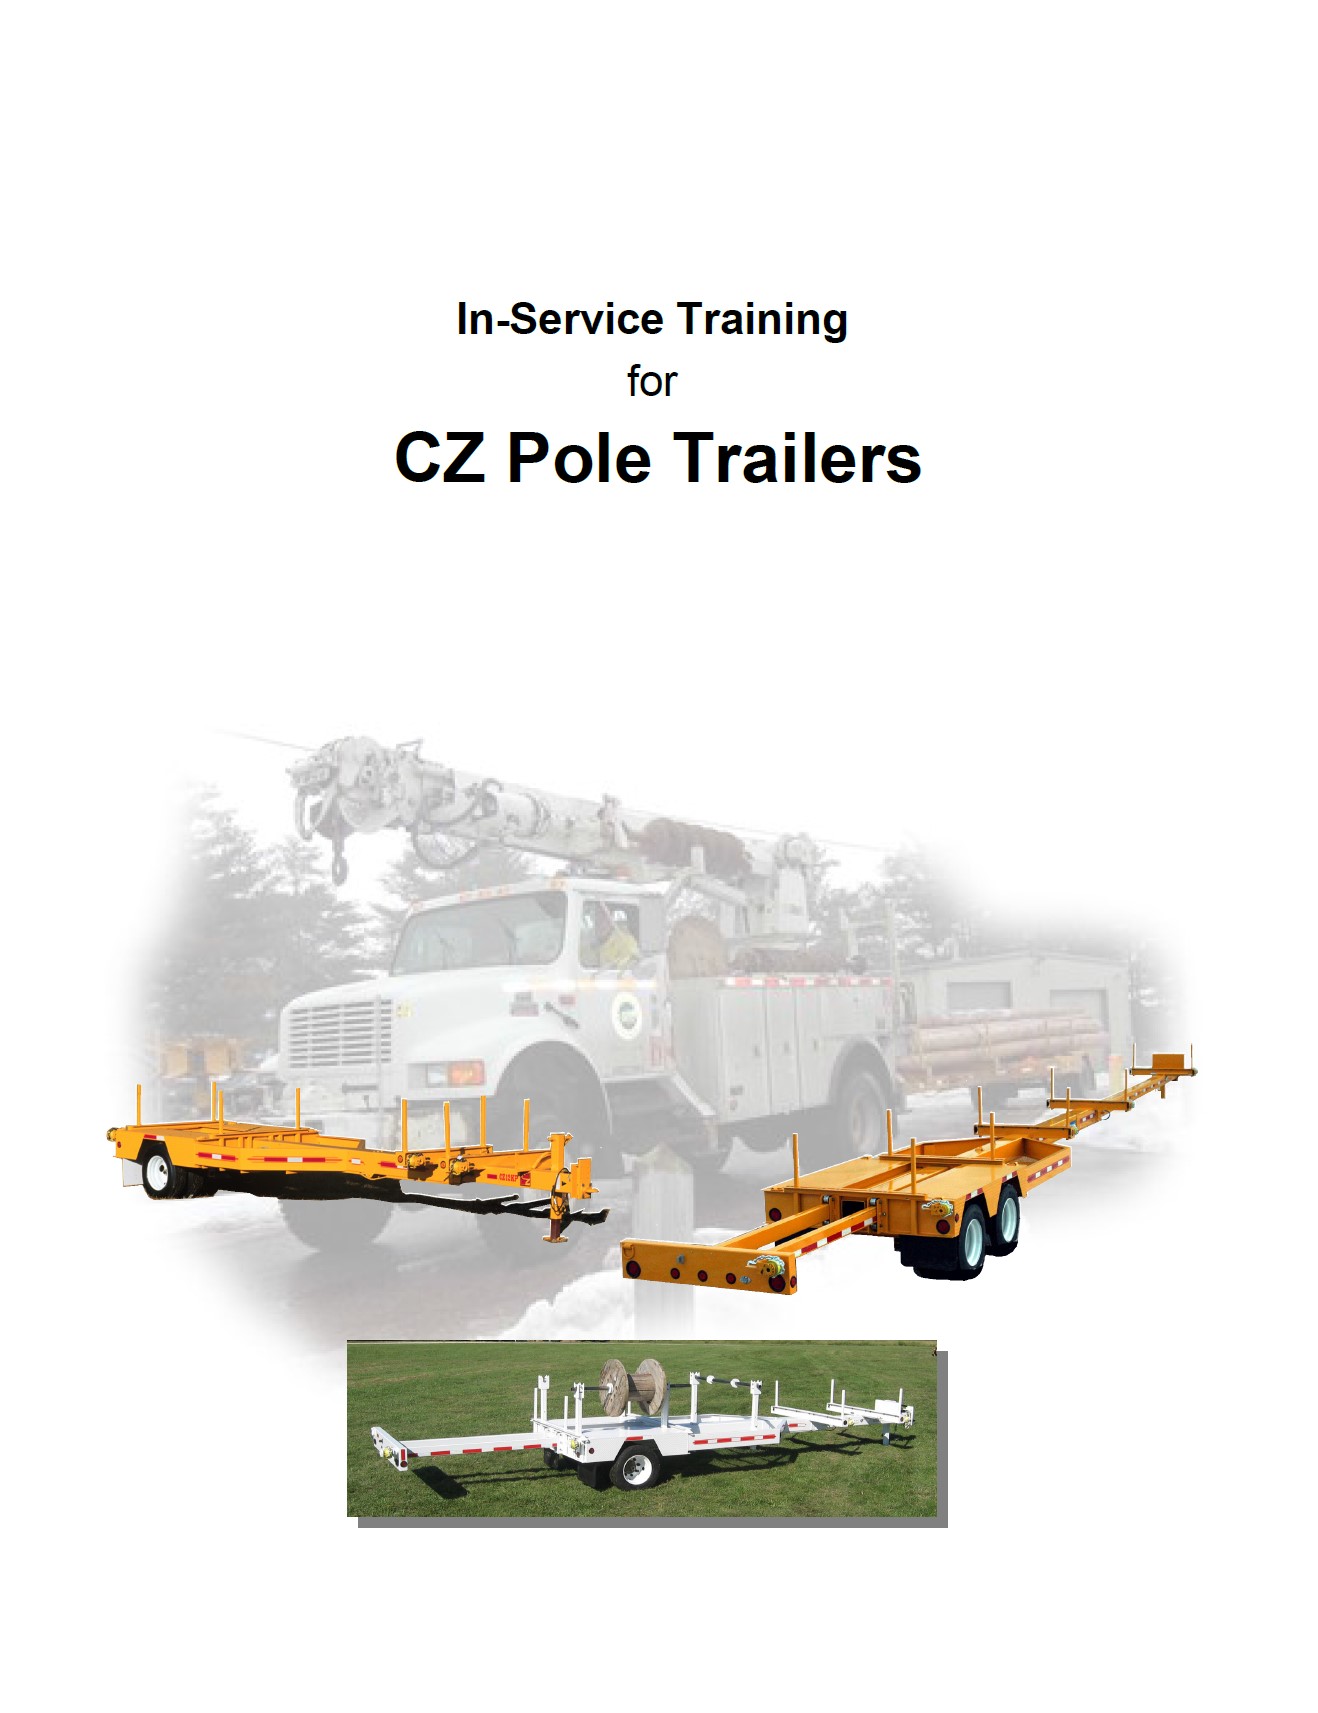 In-Service Training Manual